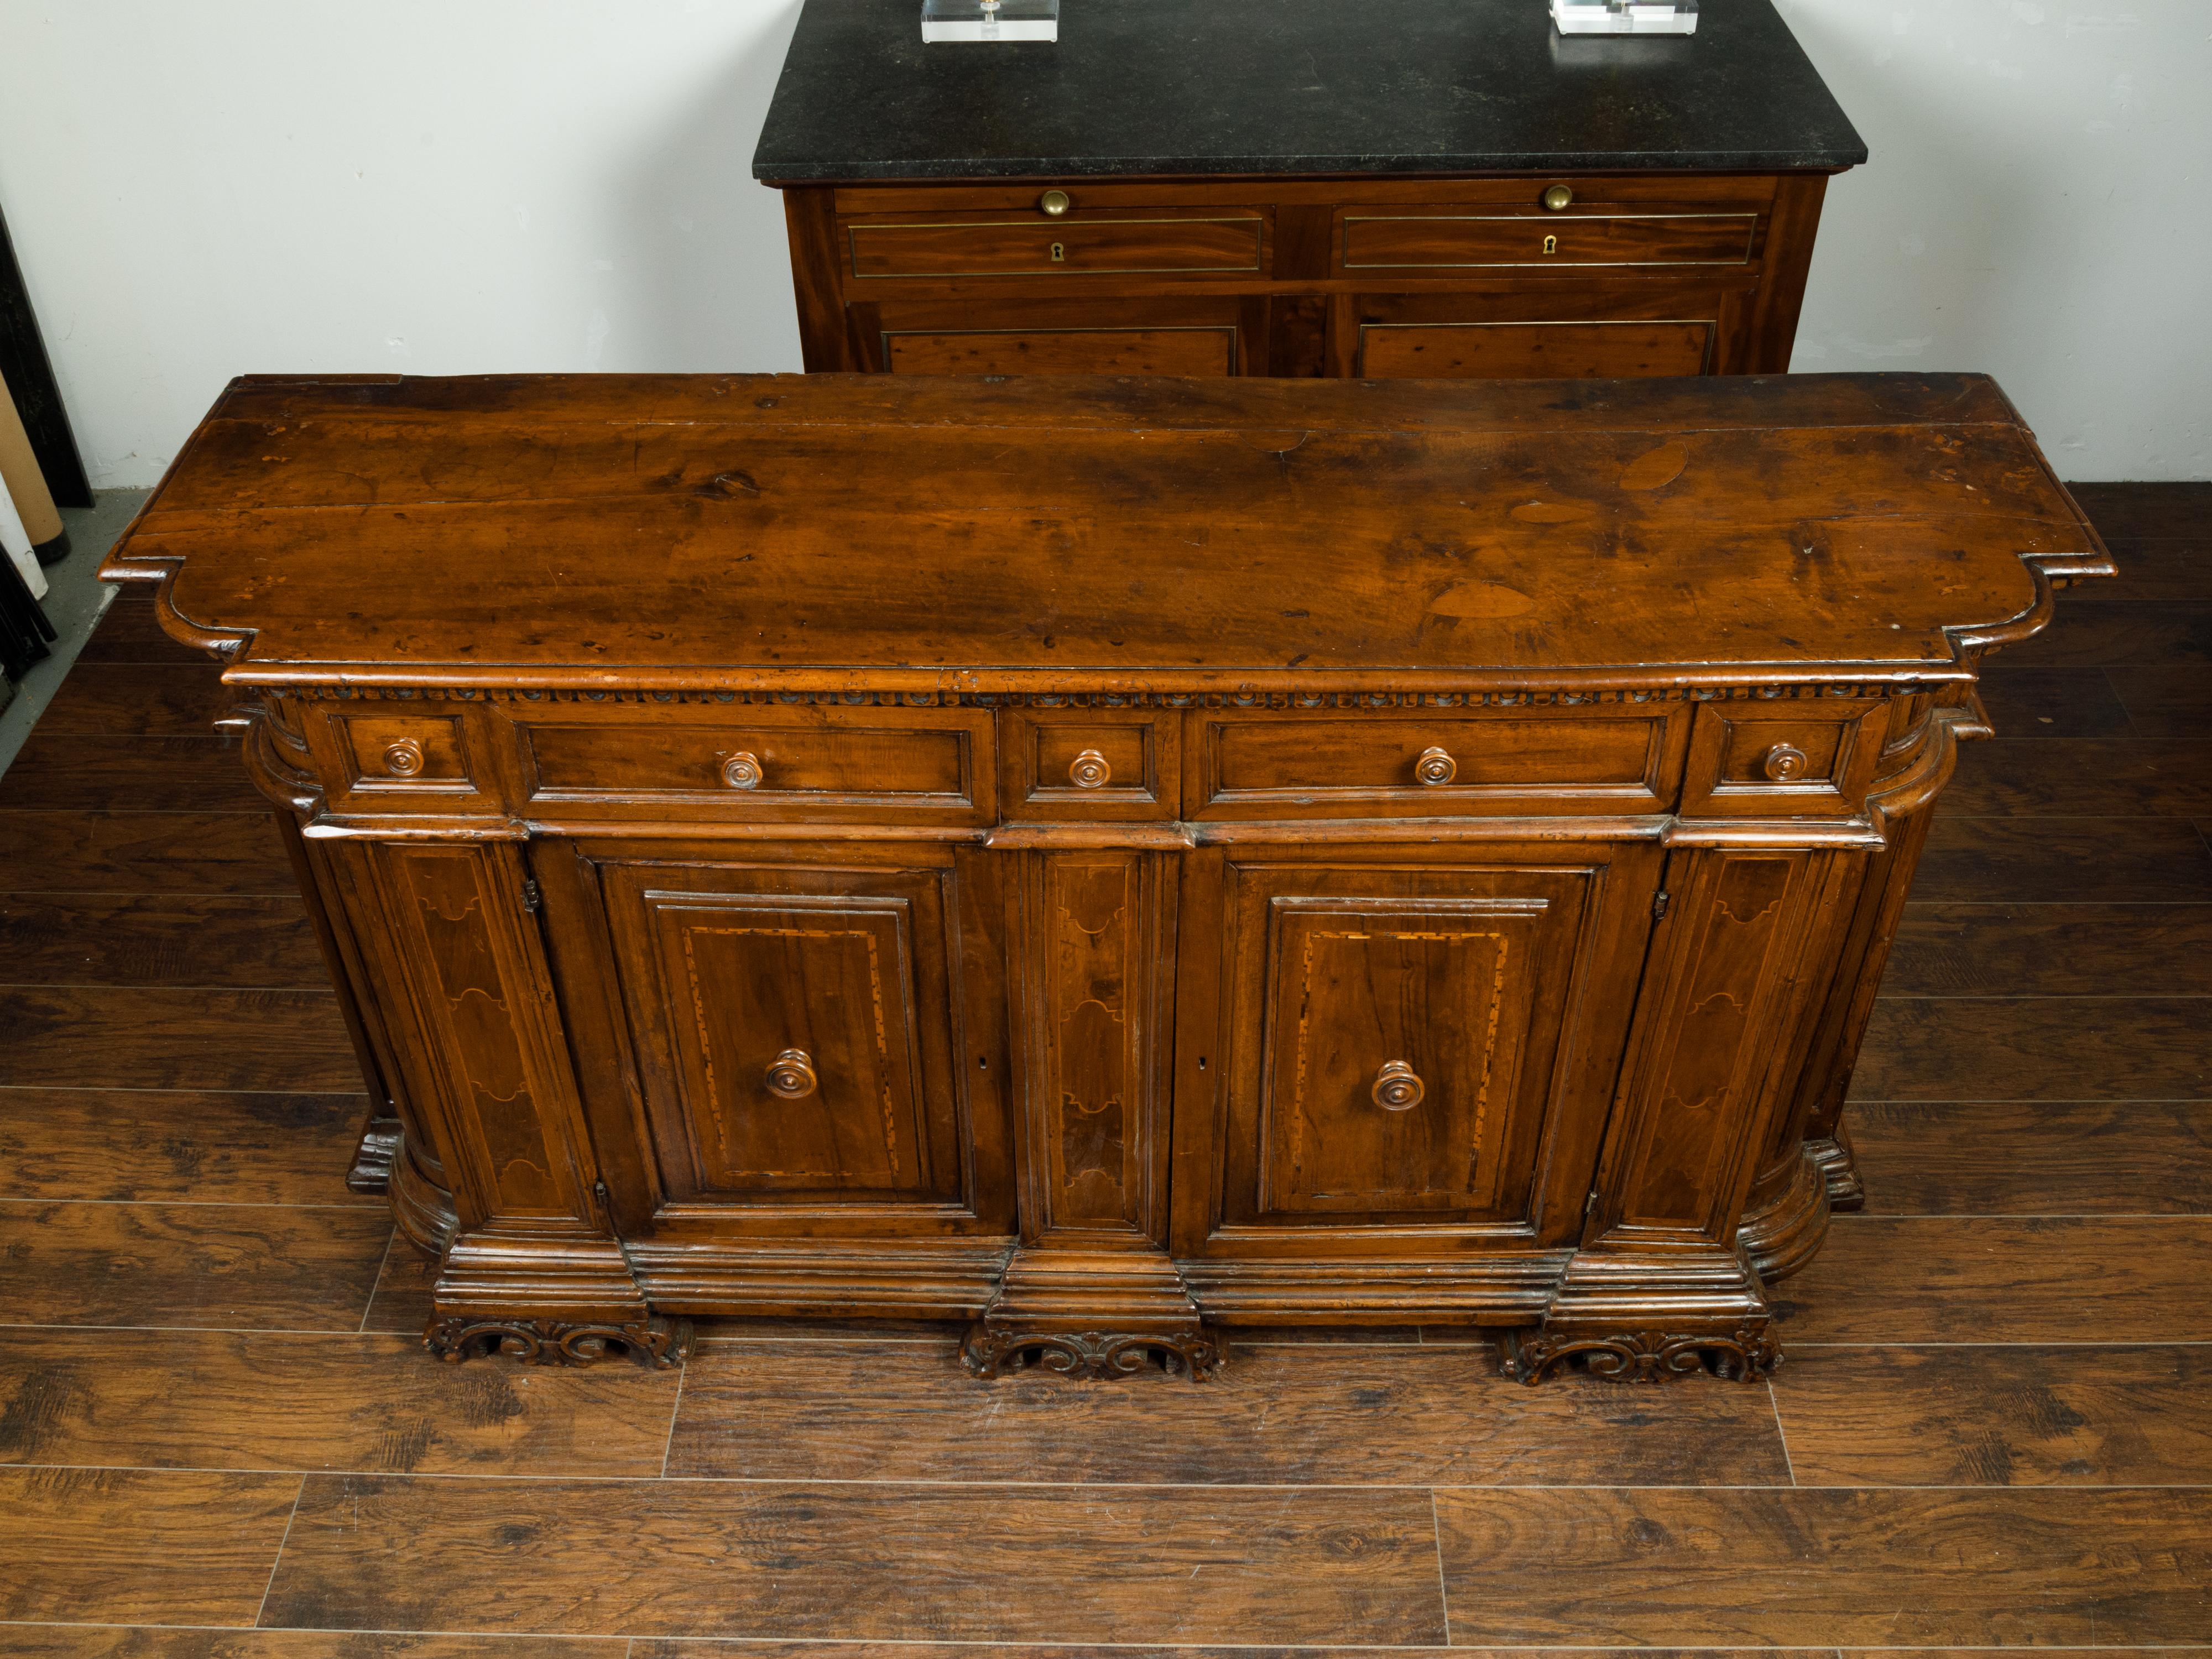 An Italian walnut credenza from the early 19th century, with drawers over doors, inlay and carved feet. Created in Italy in the early years of the 19th century, this walnut credenza features a rectangular top with rounded corners in the front,